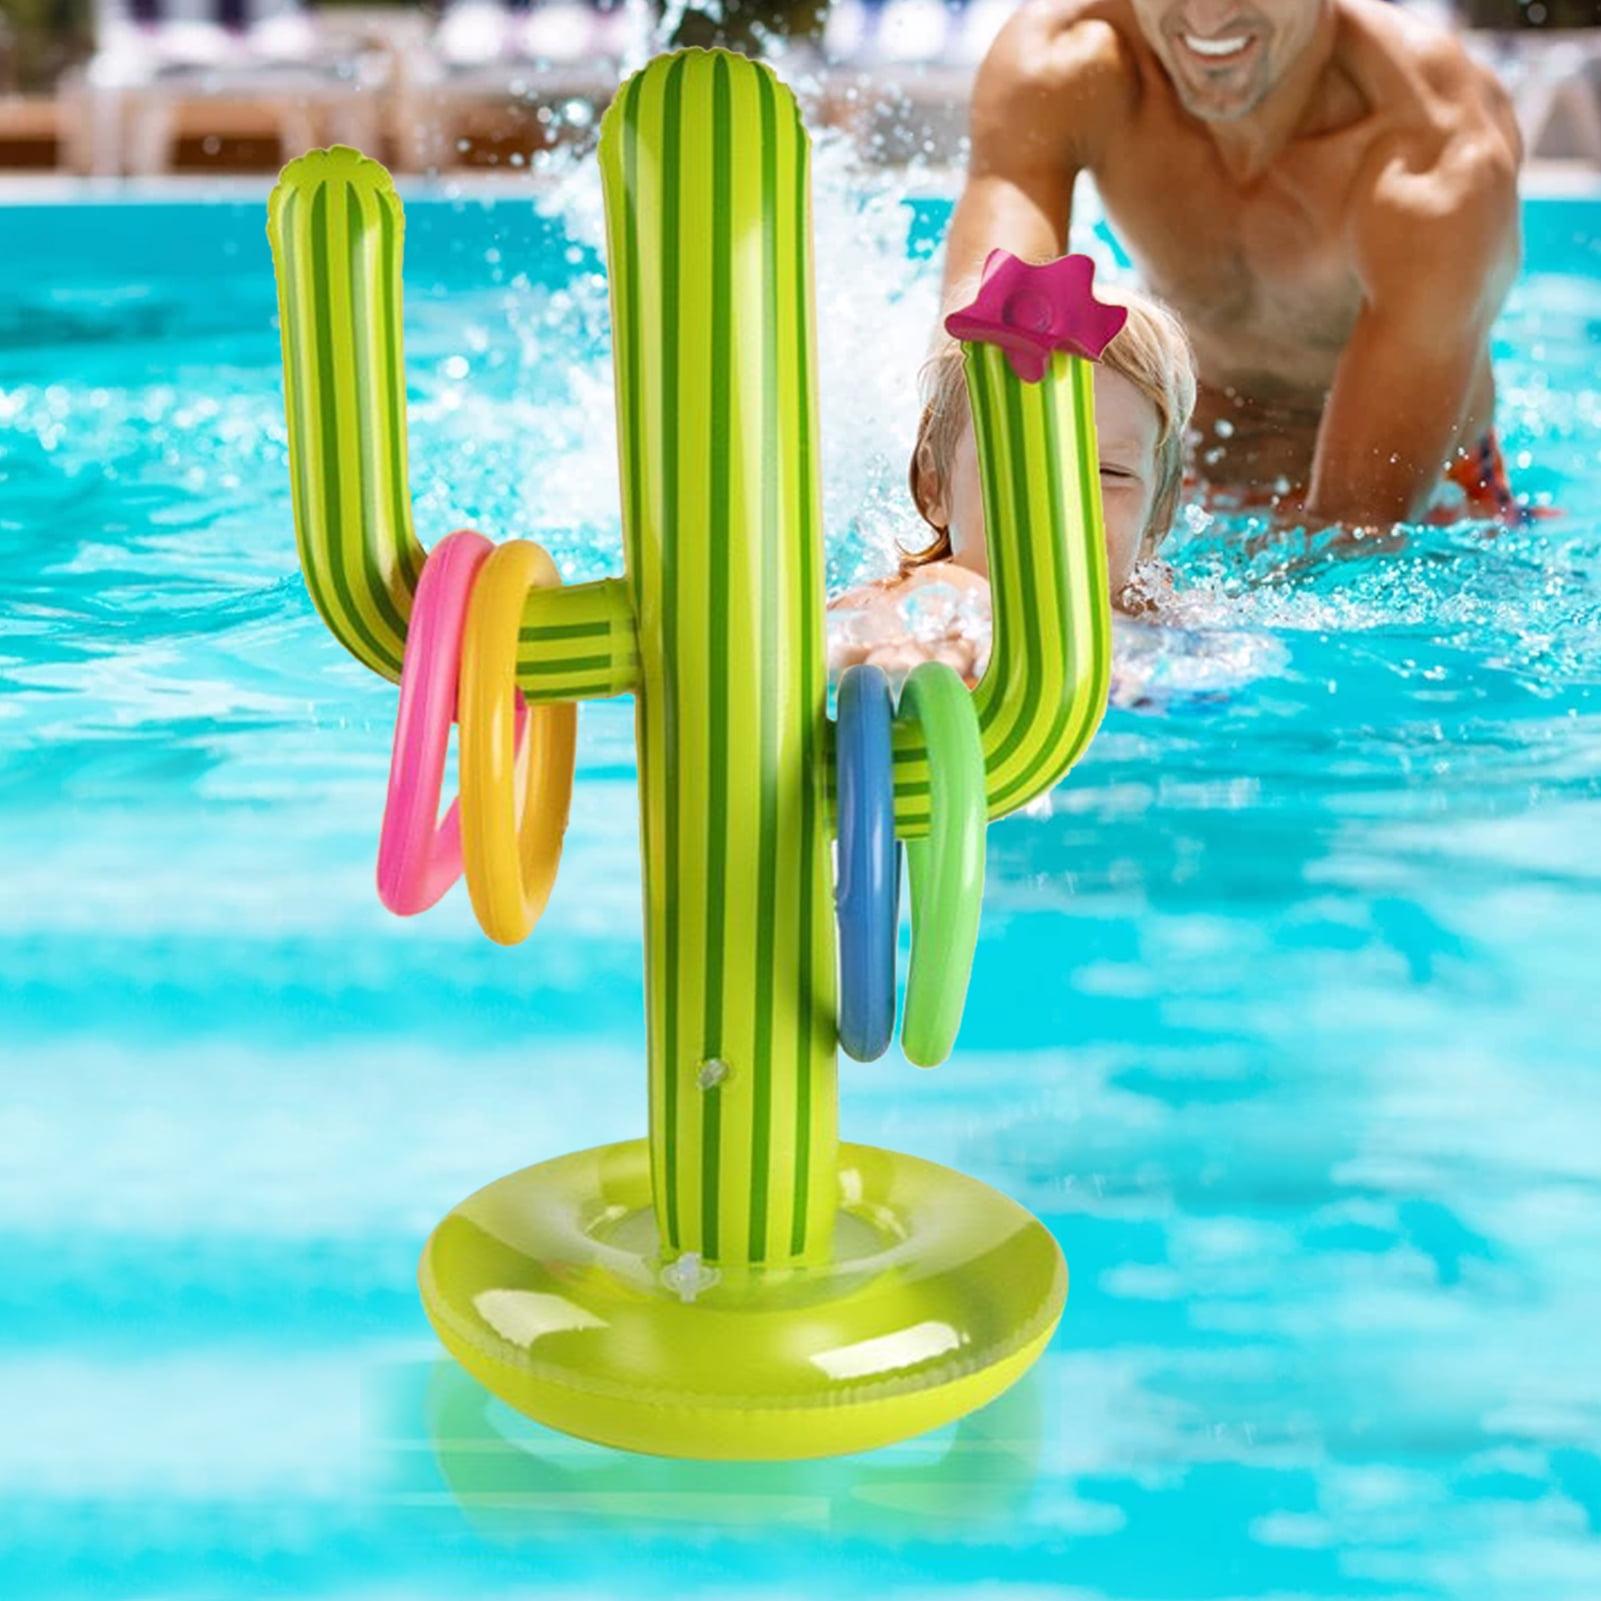 VKTY Inflatable Cactus Ring Toss Game Set,Beach Party Toy Floating Swimming Ring Toss for Fiesta Party Accessories Hawaiian Pool